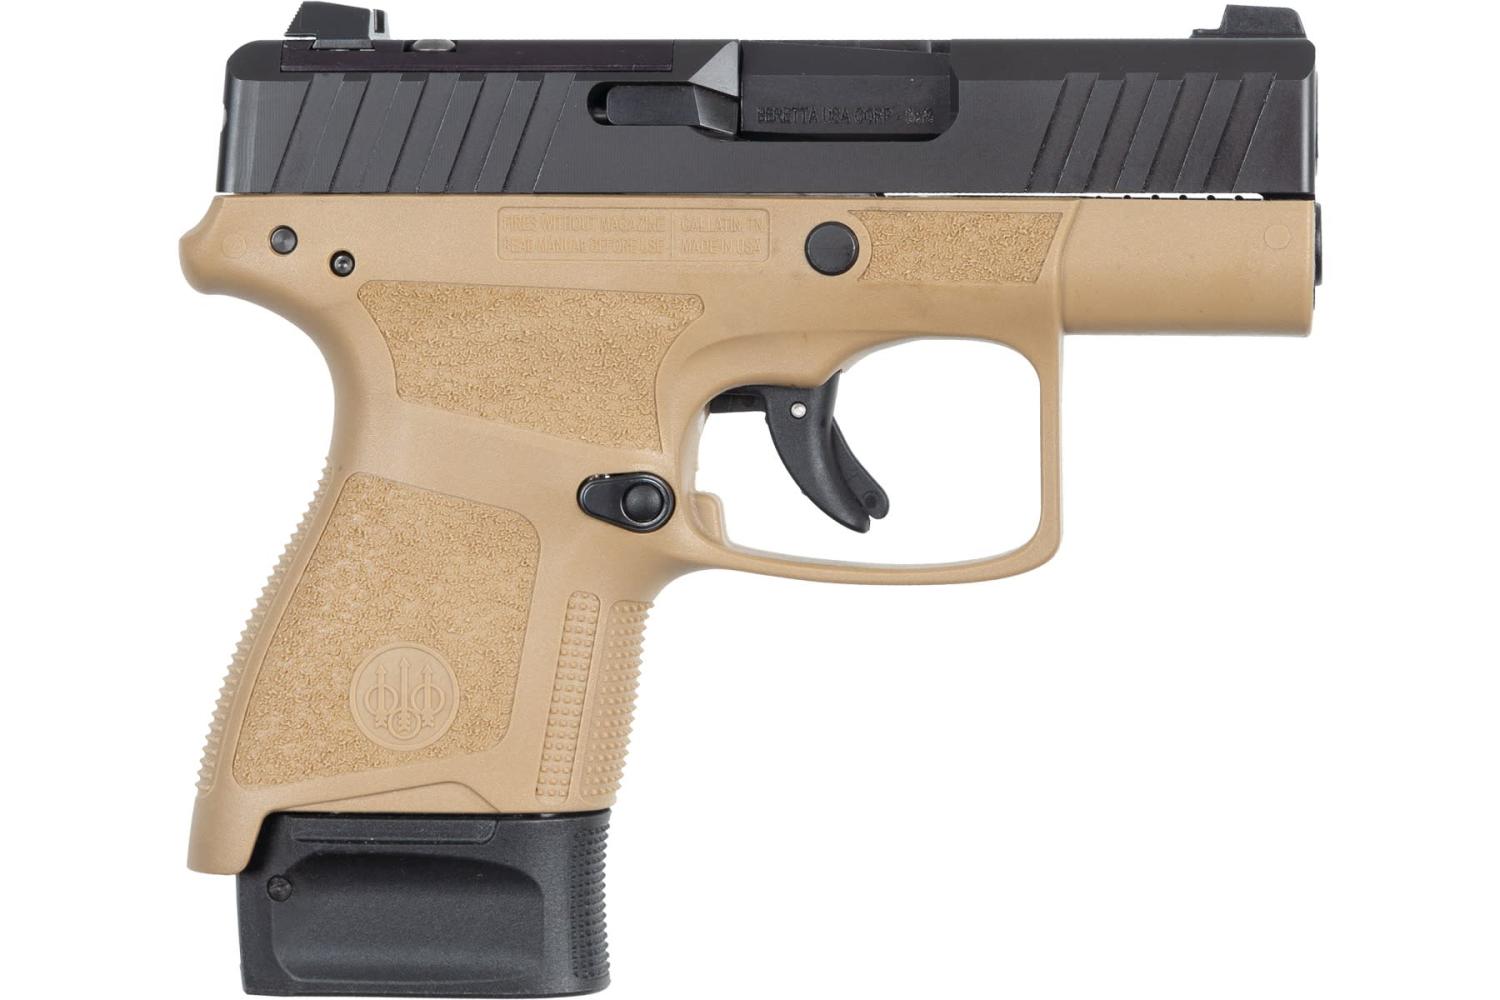 Beretta APX Carry A1 9mm FDE Optics Ready - $299 using "email for price" ($199 after $100 Rebate)